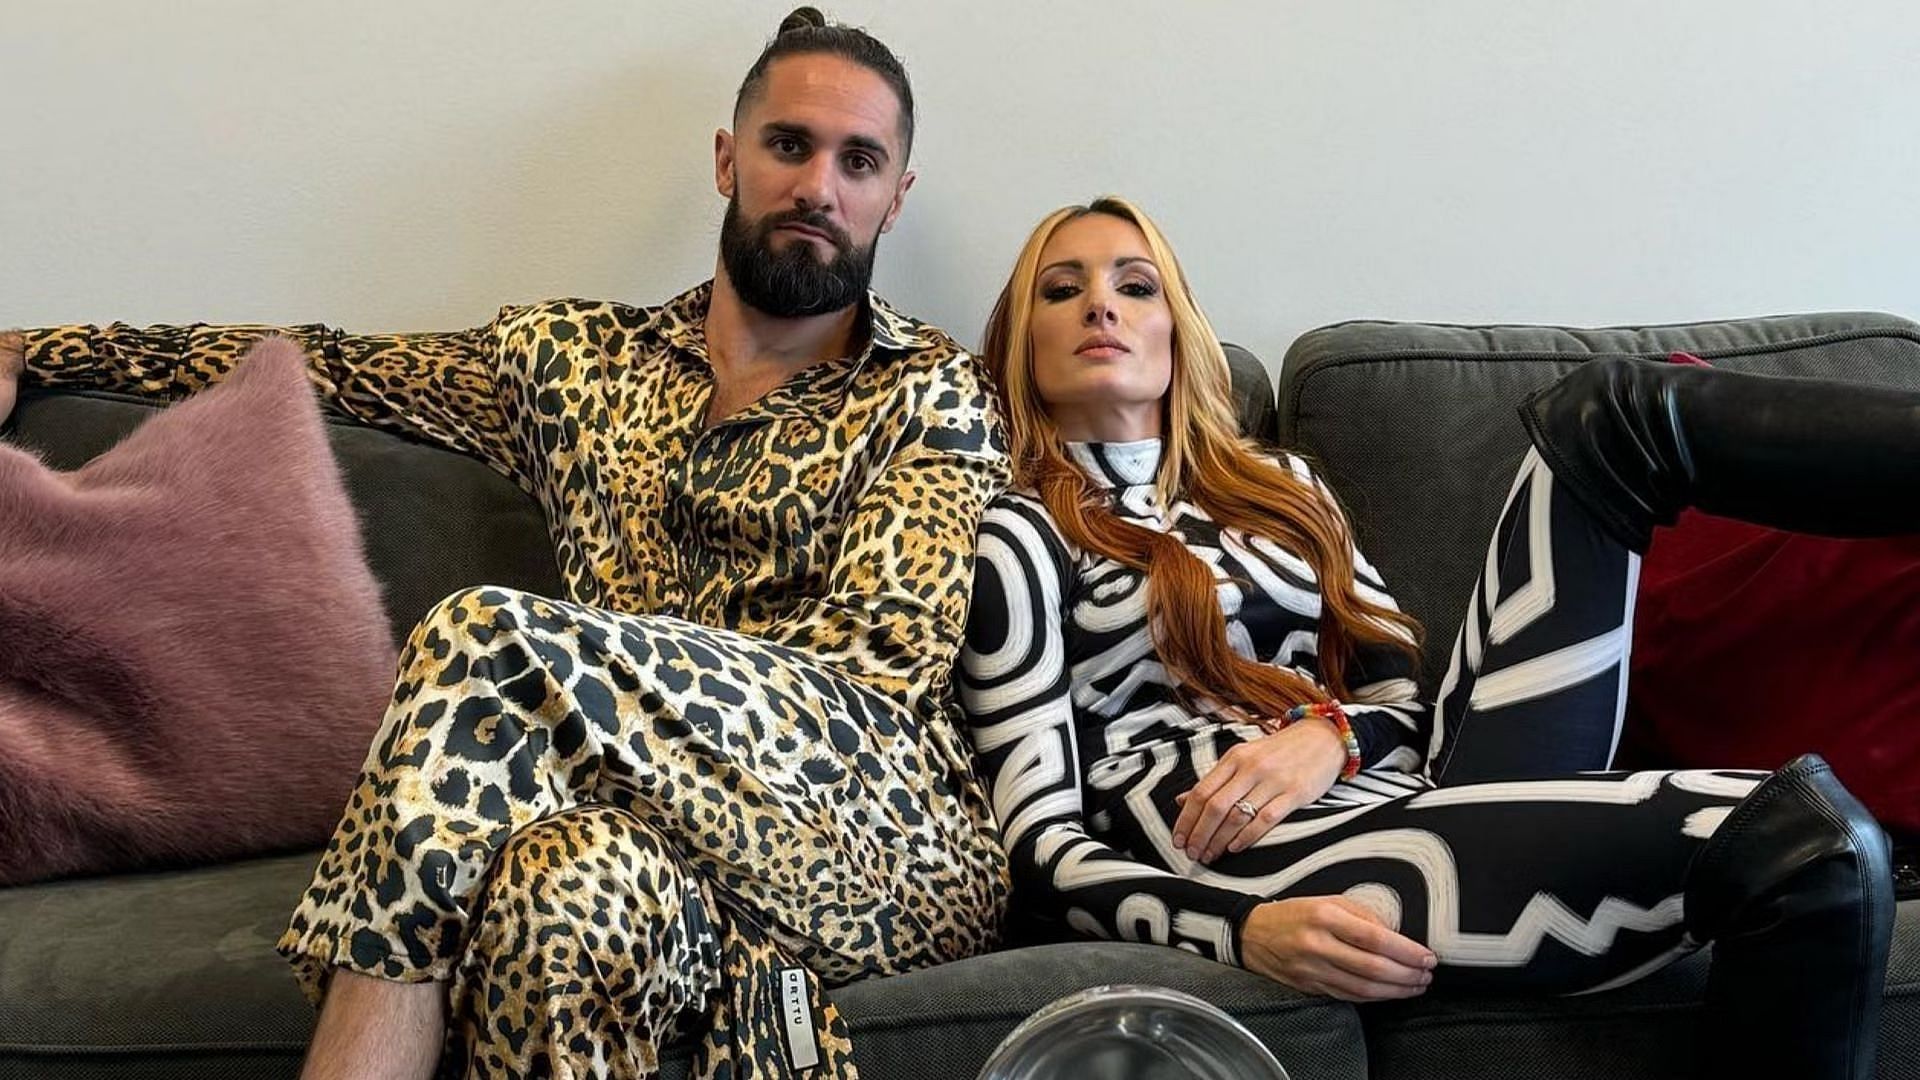 WWE Superstars Becky Lynch and Seth Rollins pose for a photo shoot